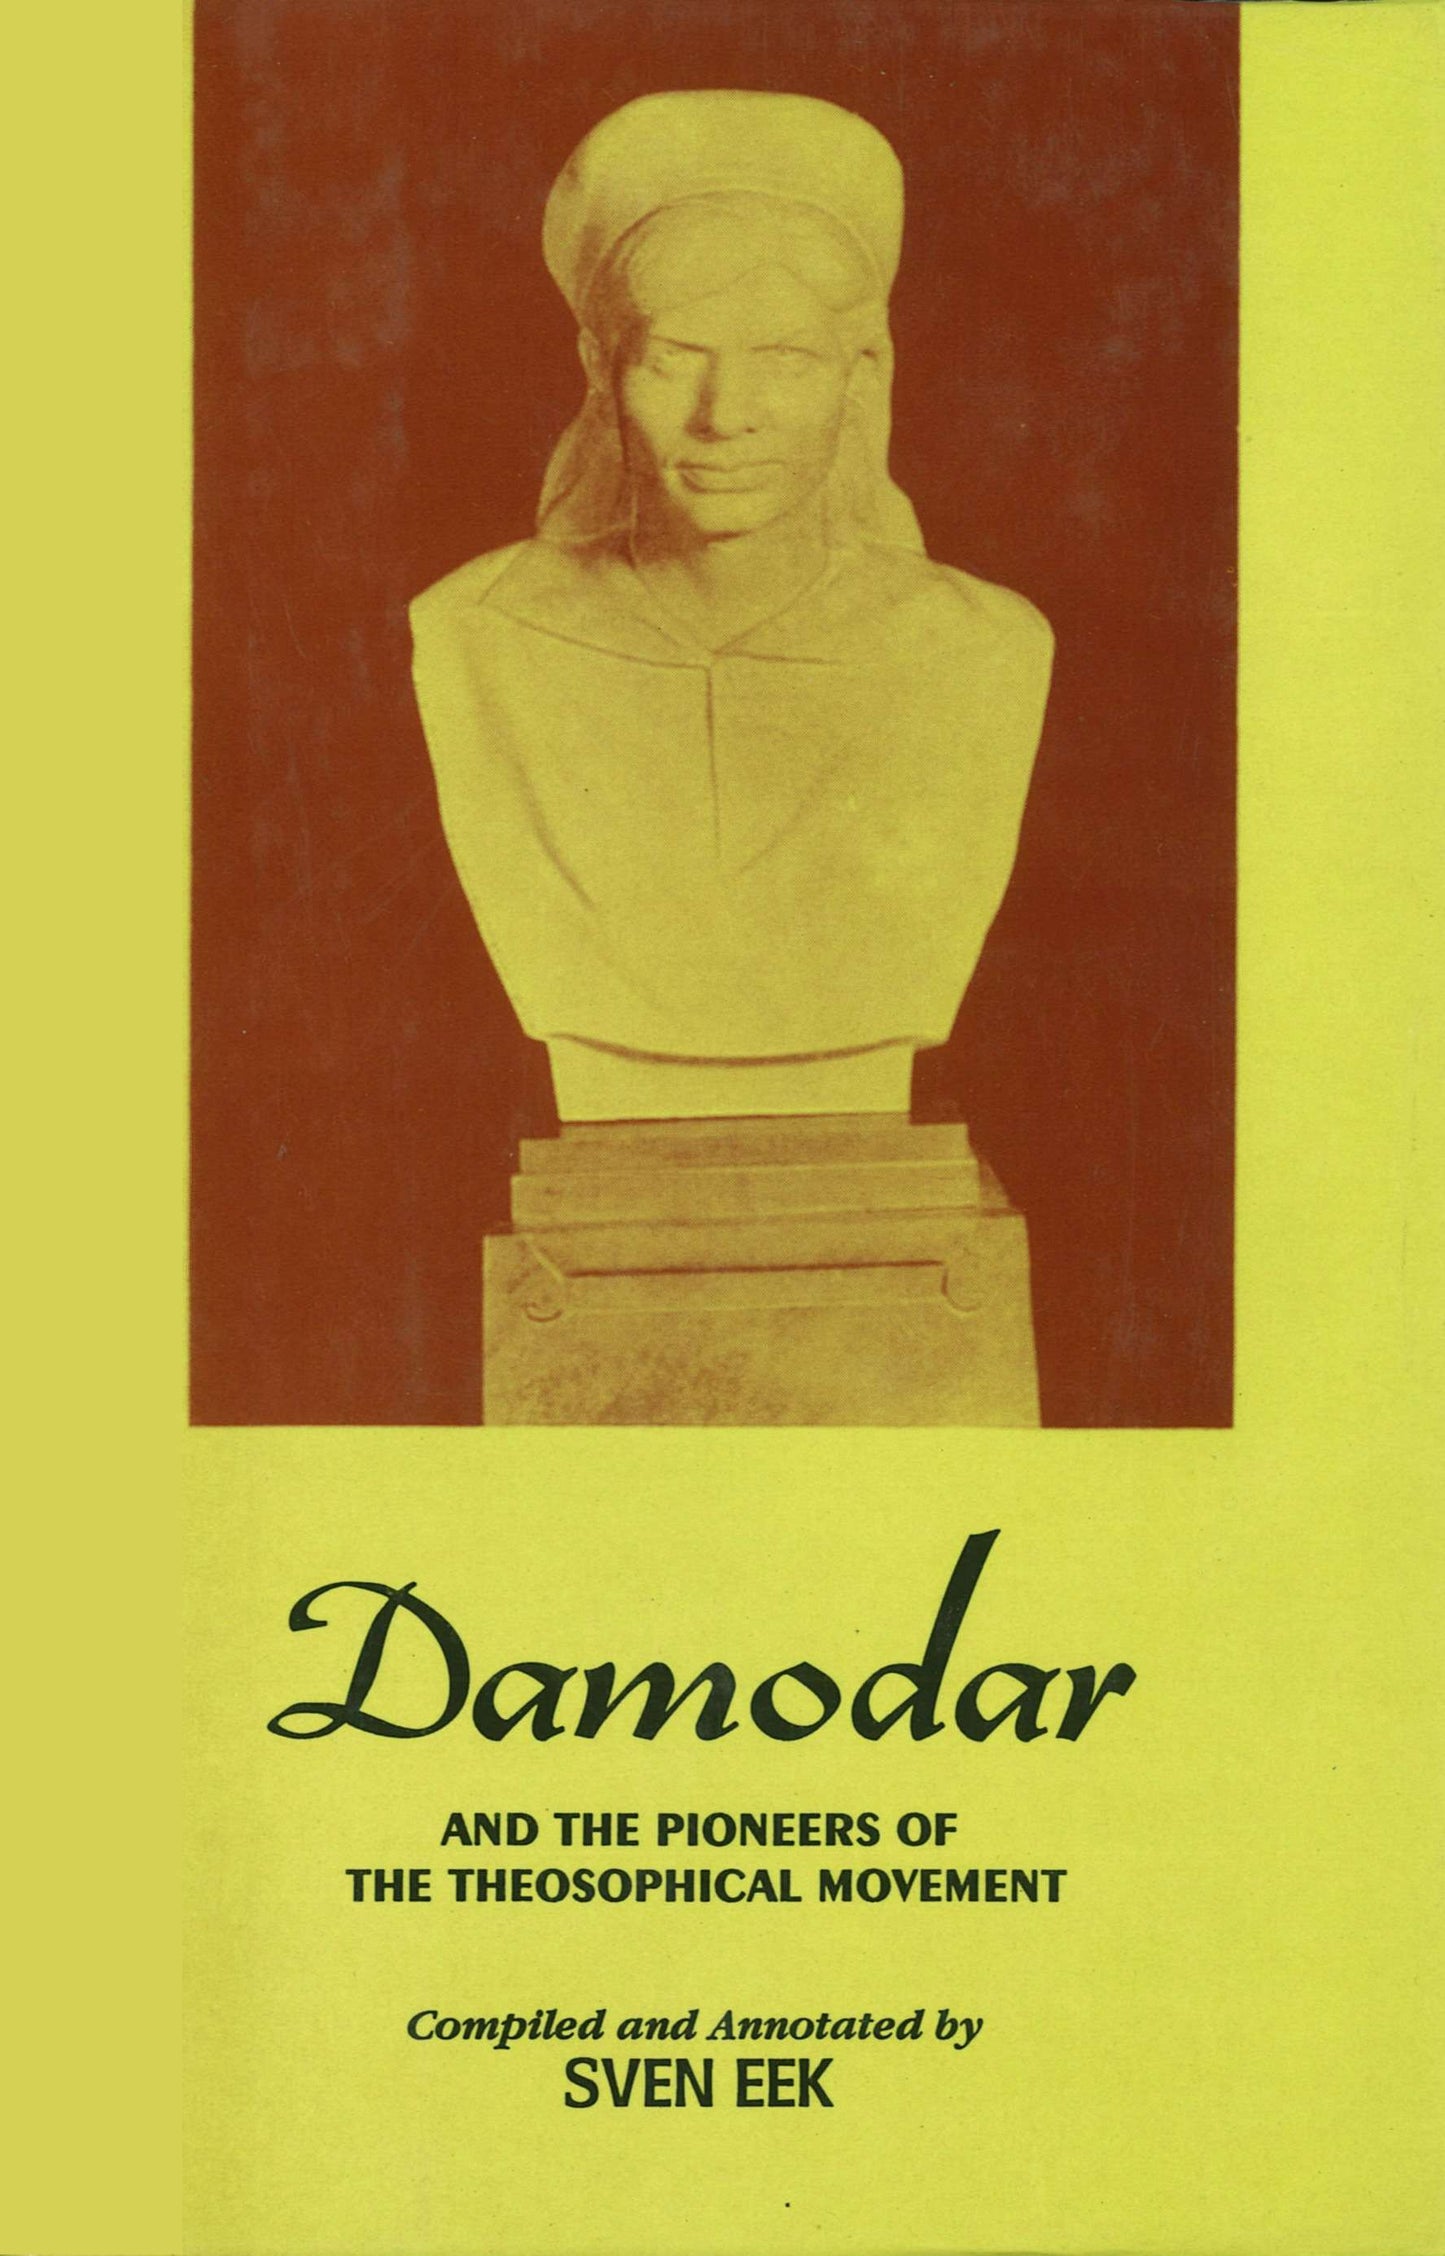 Damodar and the Pioneers of The Theosophical Movement